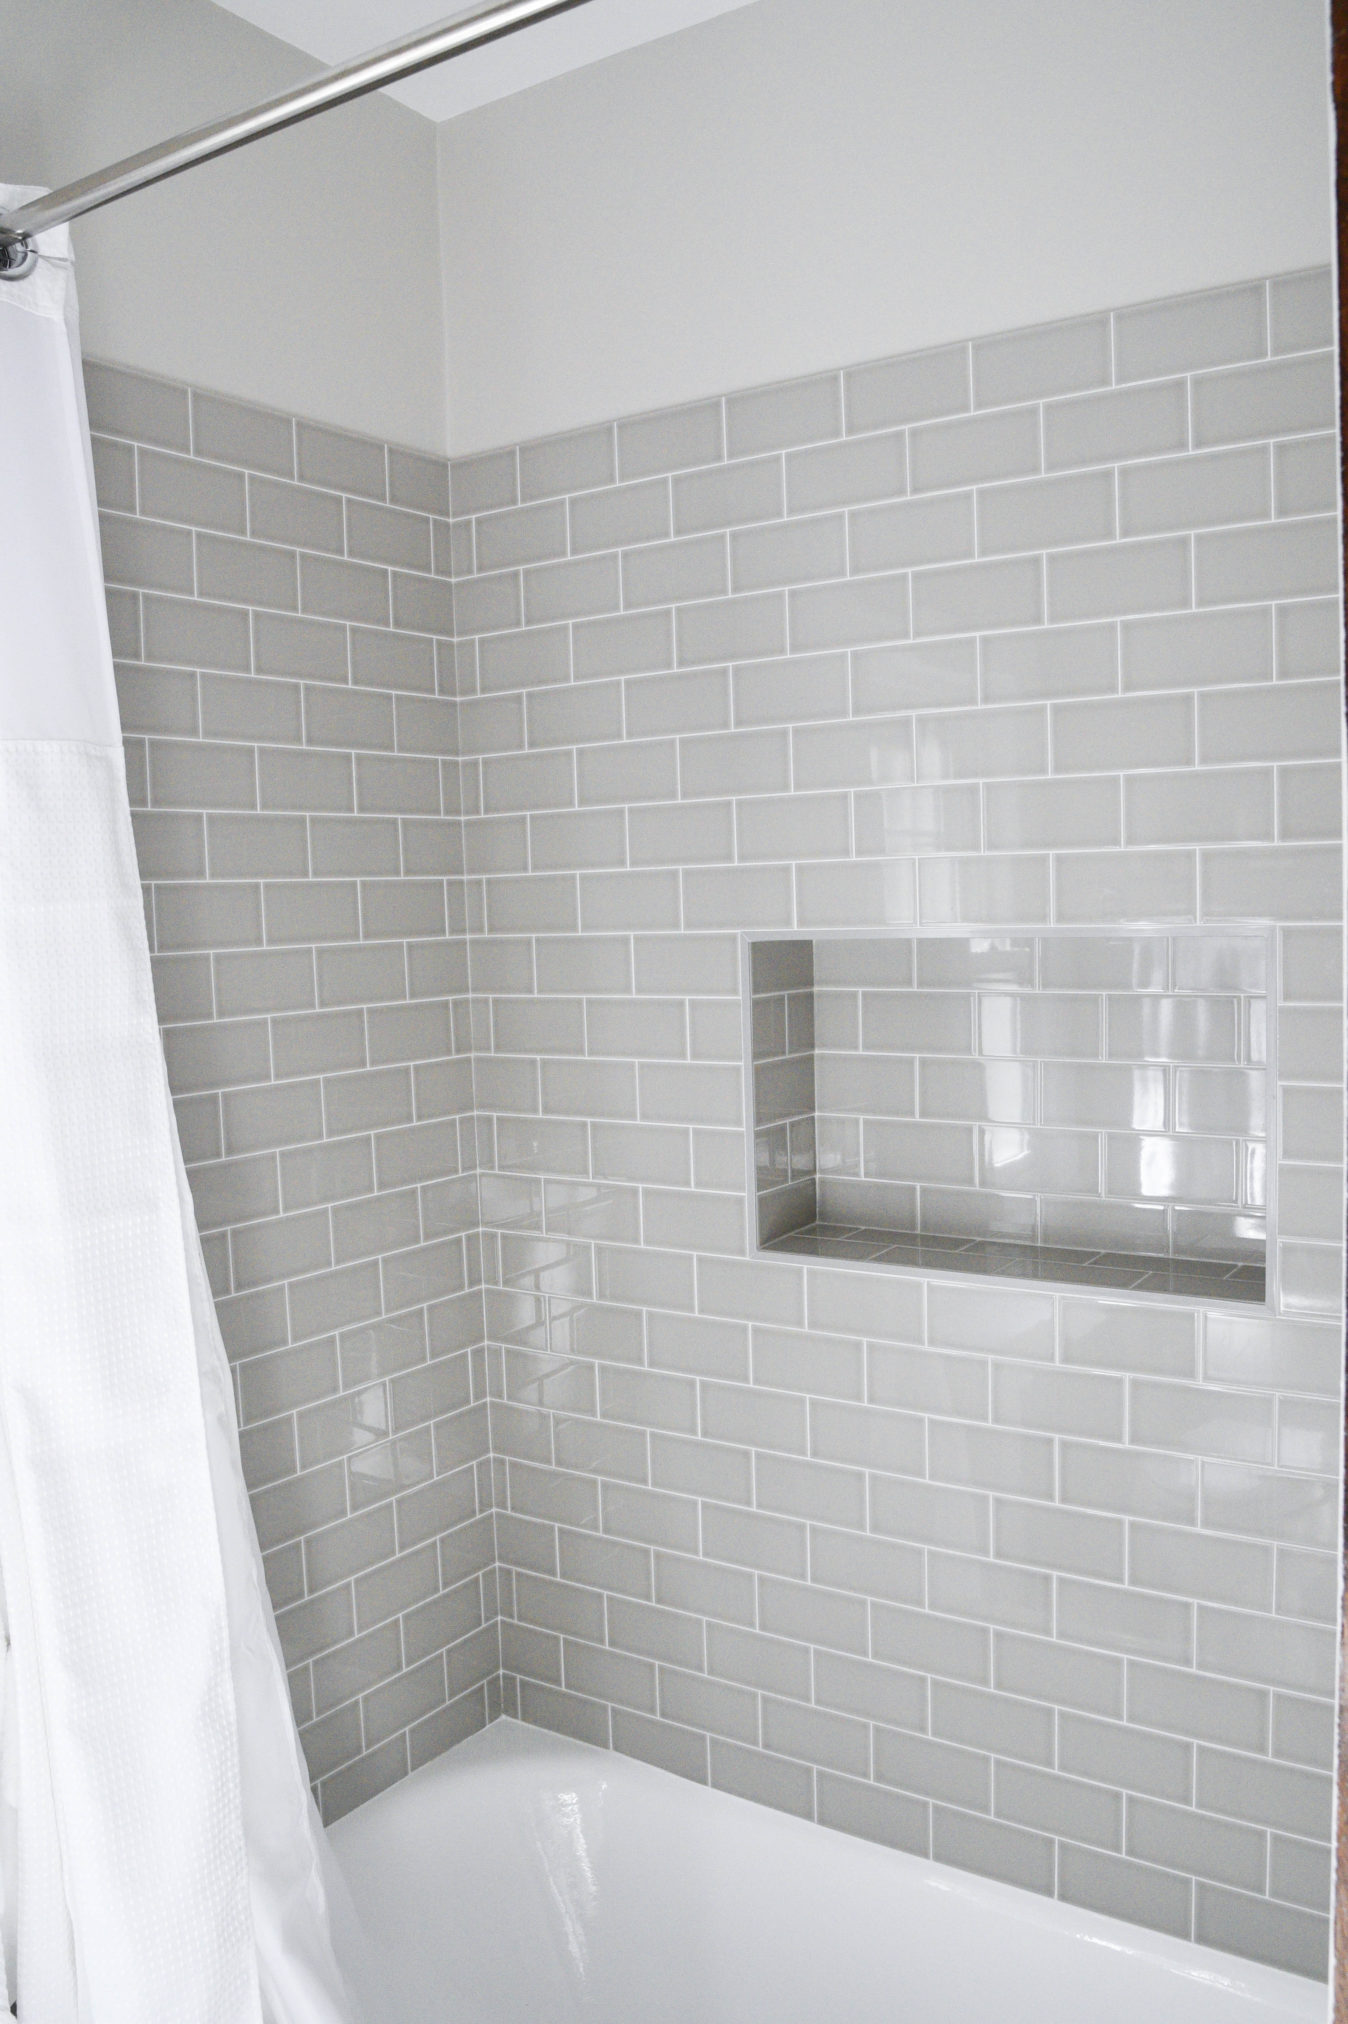 Home Bloggers Home Tour bathroom styling tips grey subway tiles www.homewithkeki.com